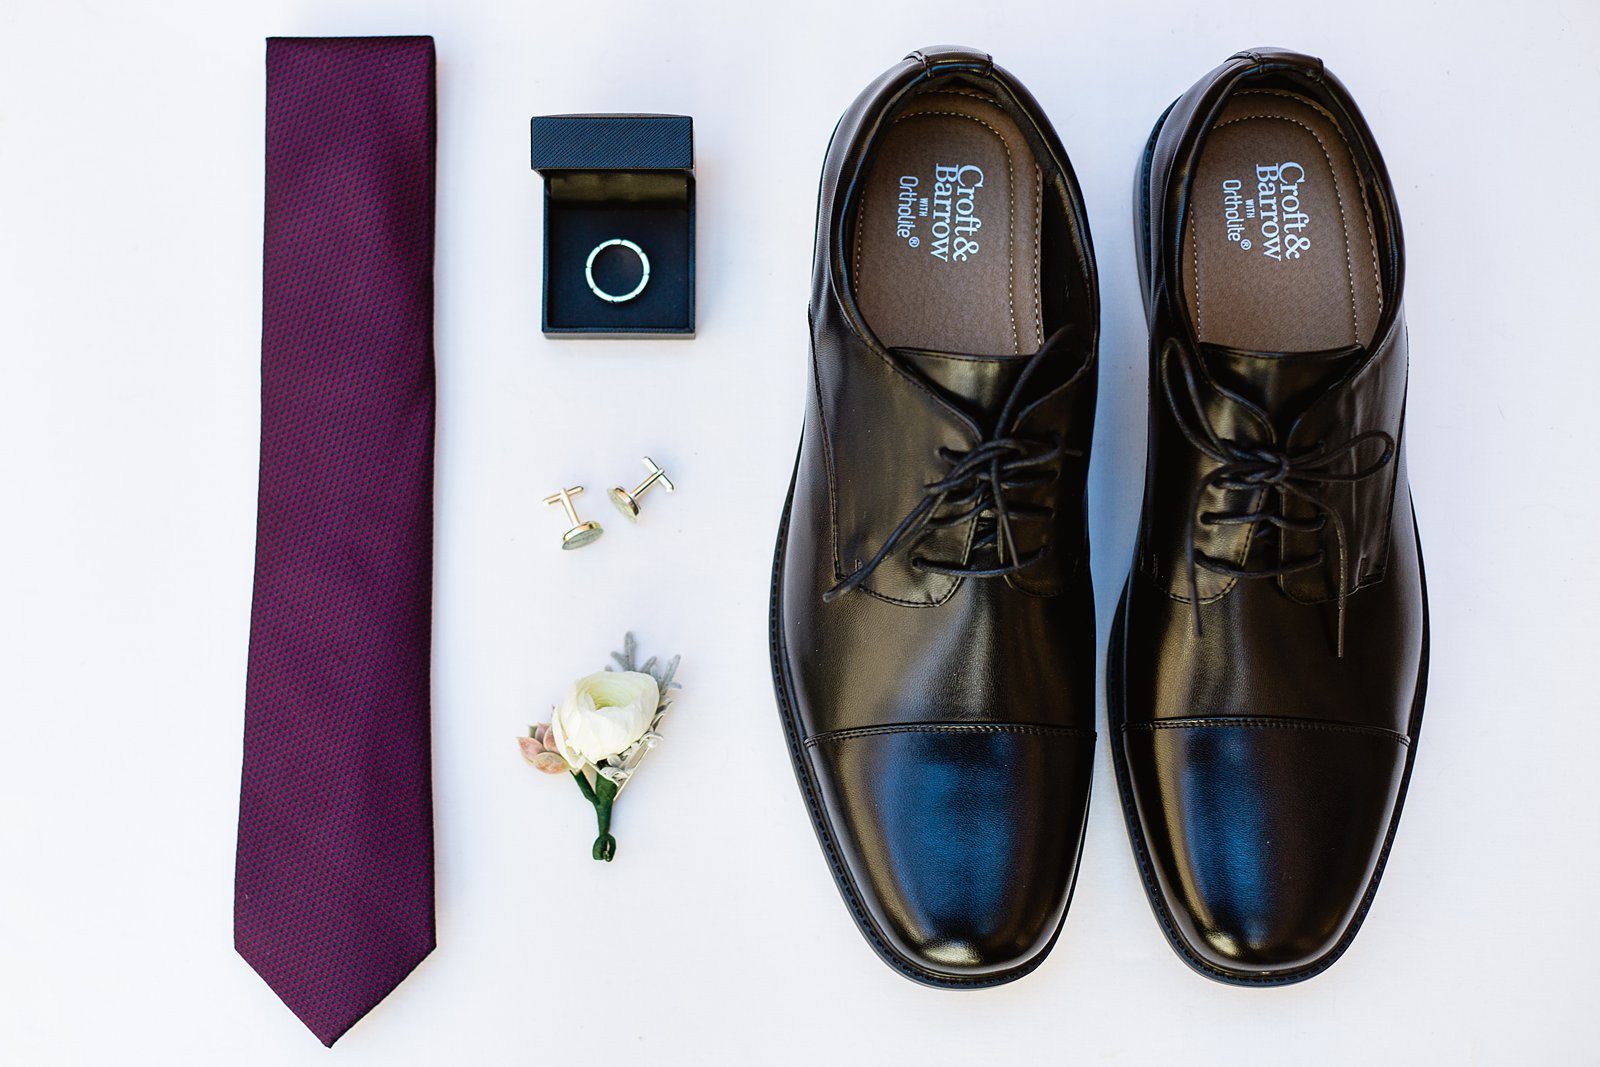 Groom's wedding day details of purple tie, cufflinks, ring and black shoes by PMA Photography.